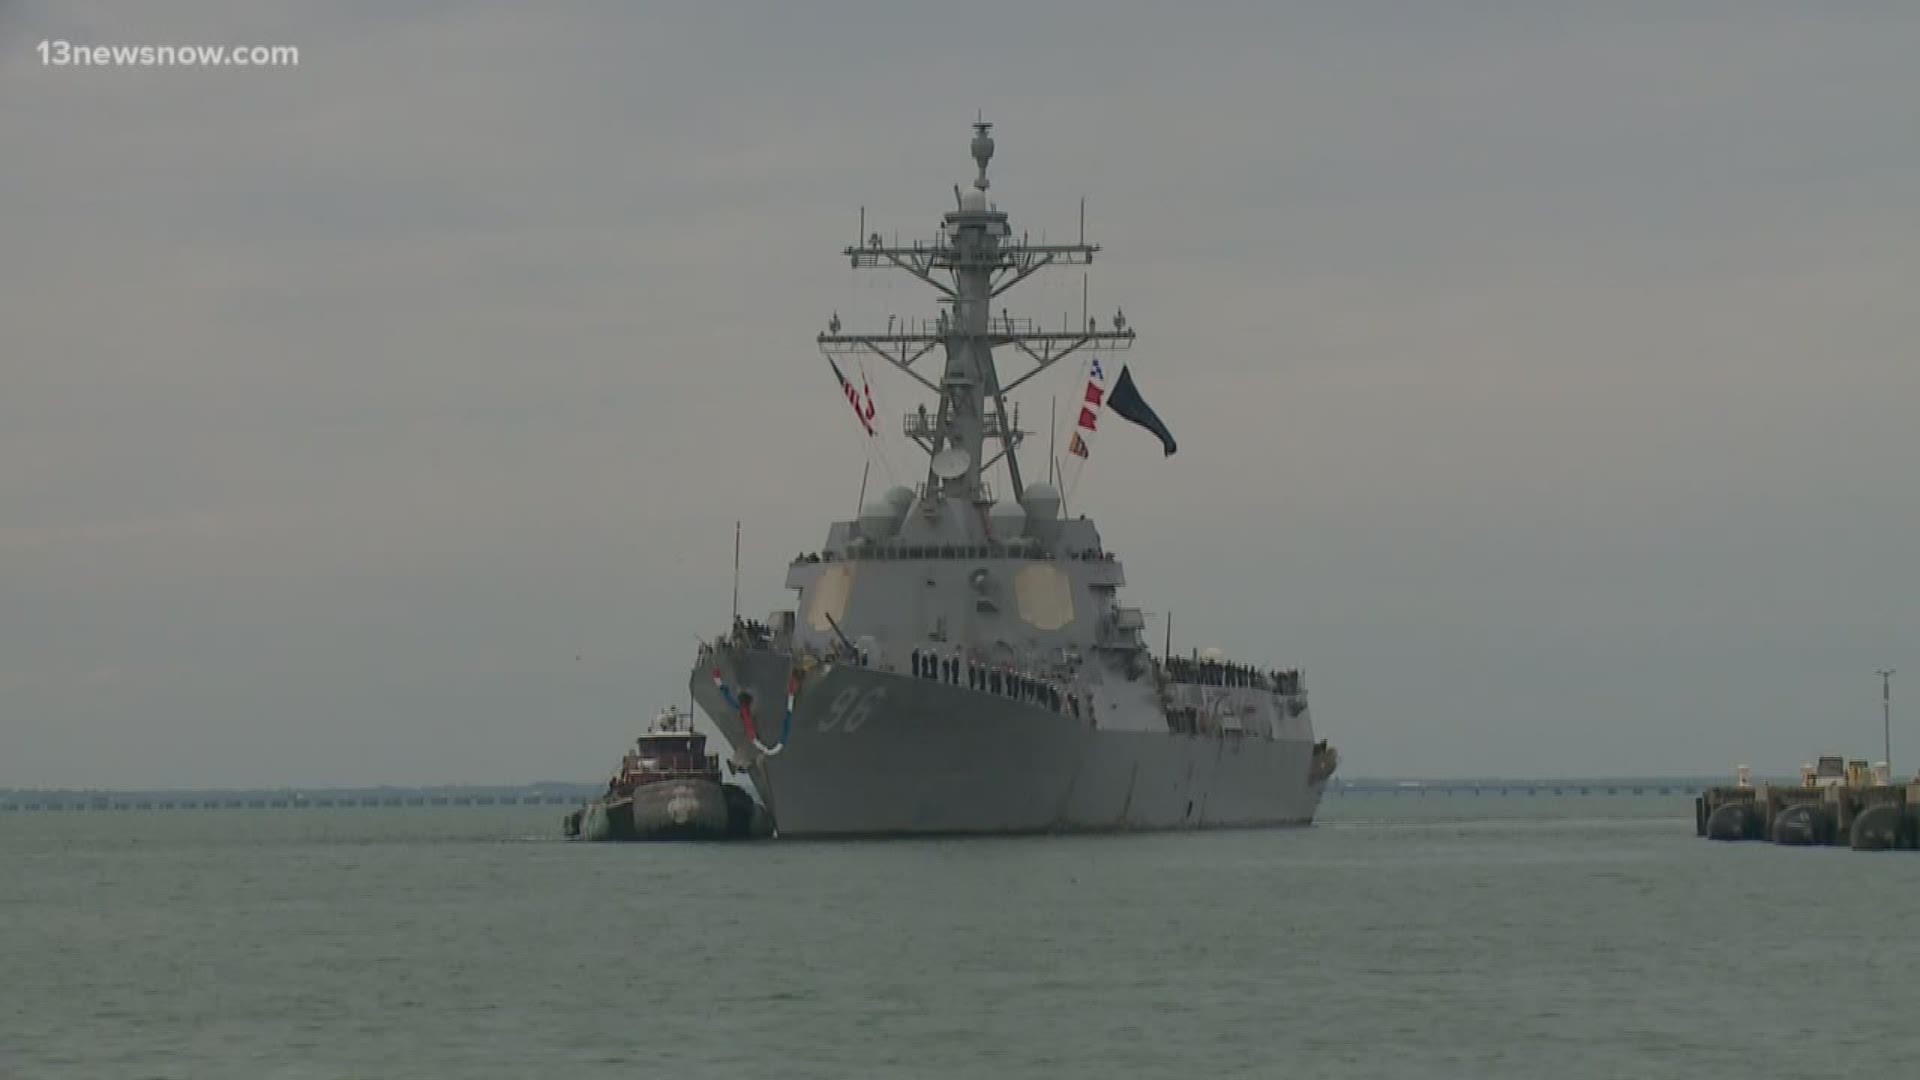 The warships returned to their homeport of Naval Station Norfolk on Nov. 5 after a seven-month deployment.